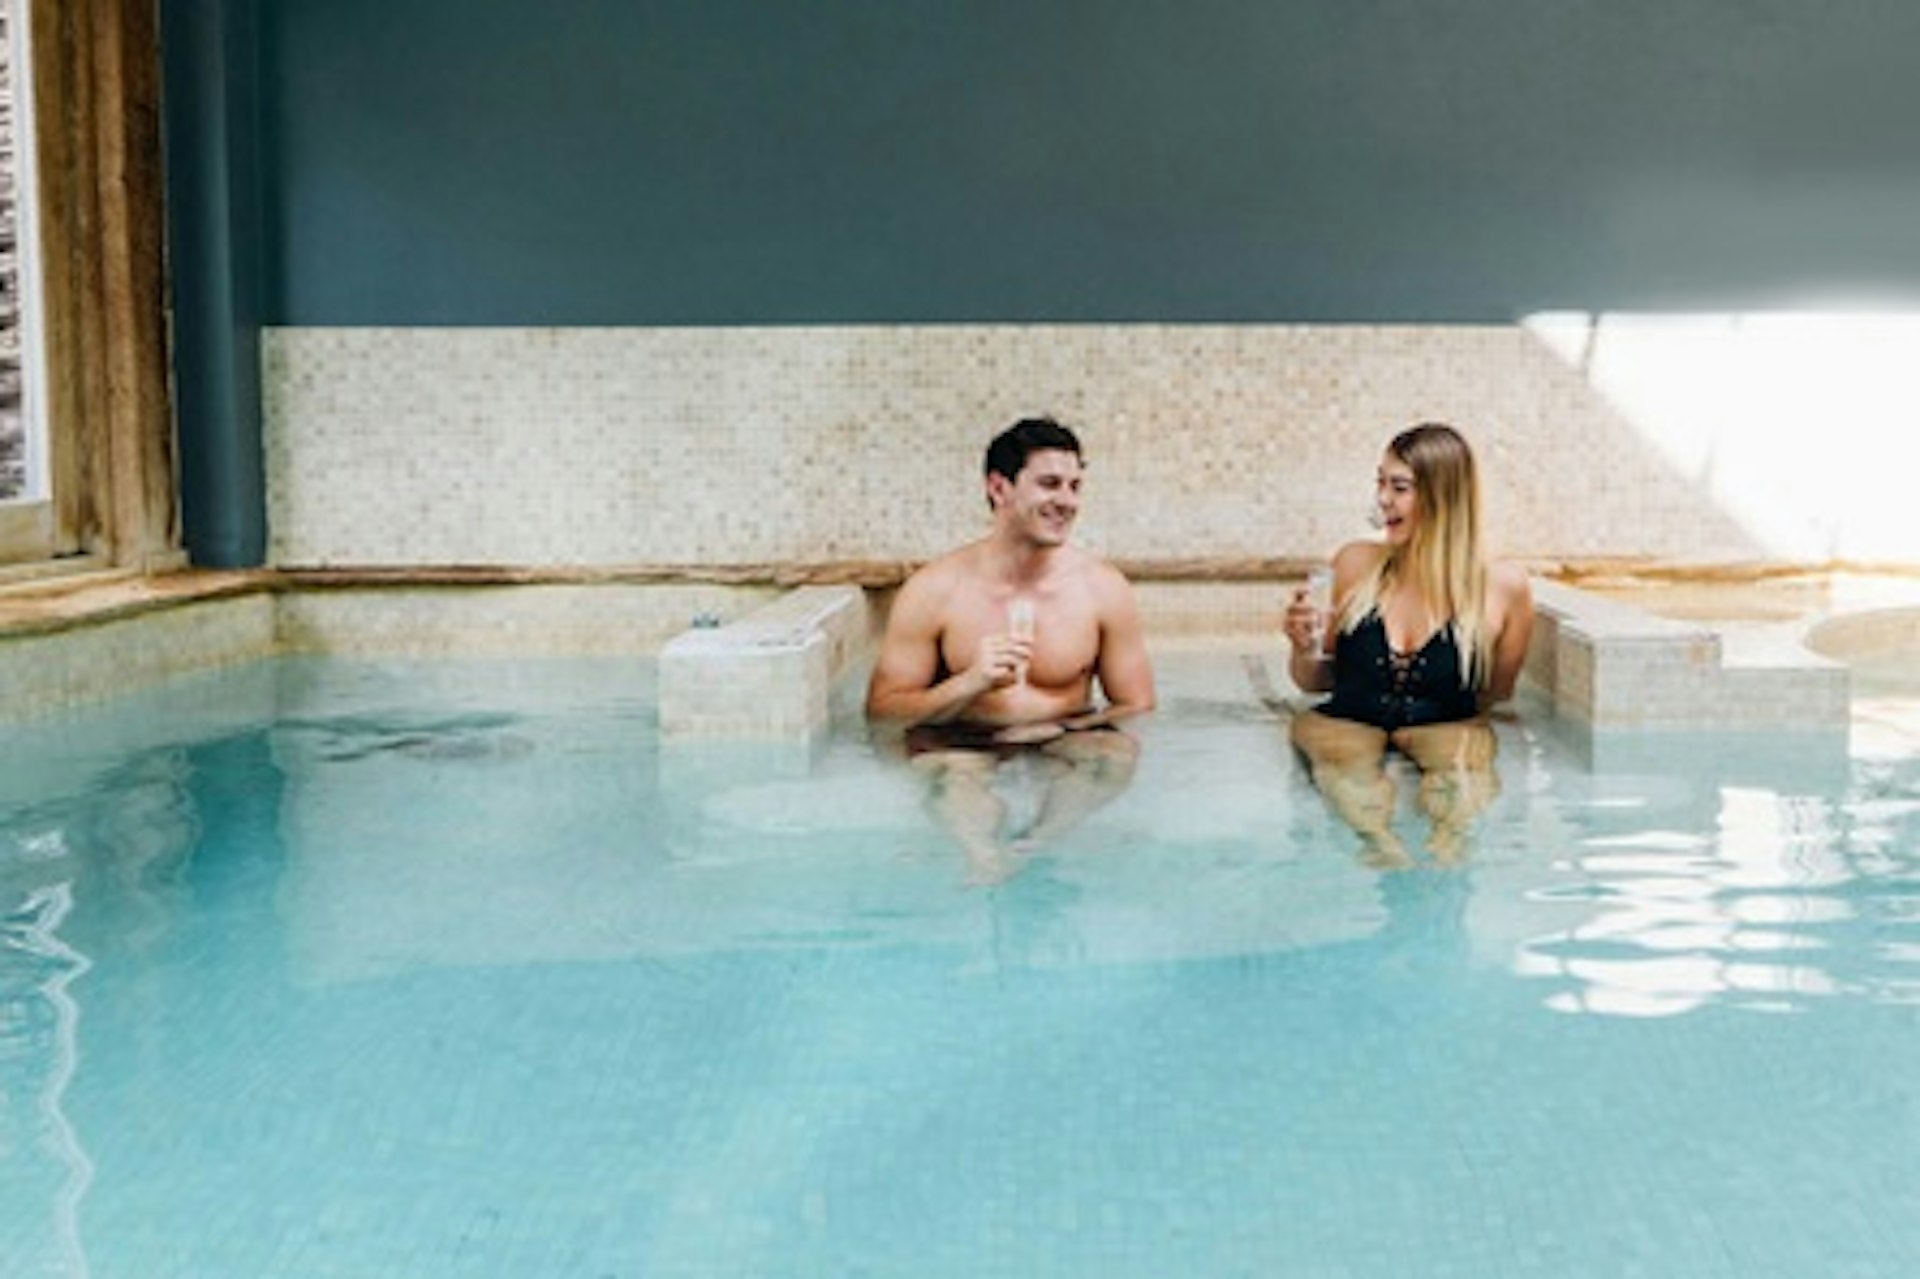 Two Night Soothing Spa Break with Dinner and Treatment for Two at Bannatyne Charlton House